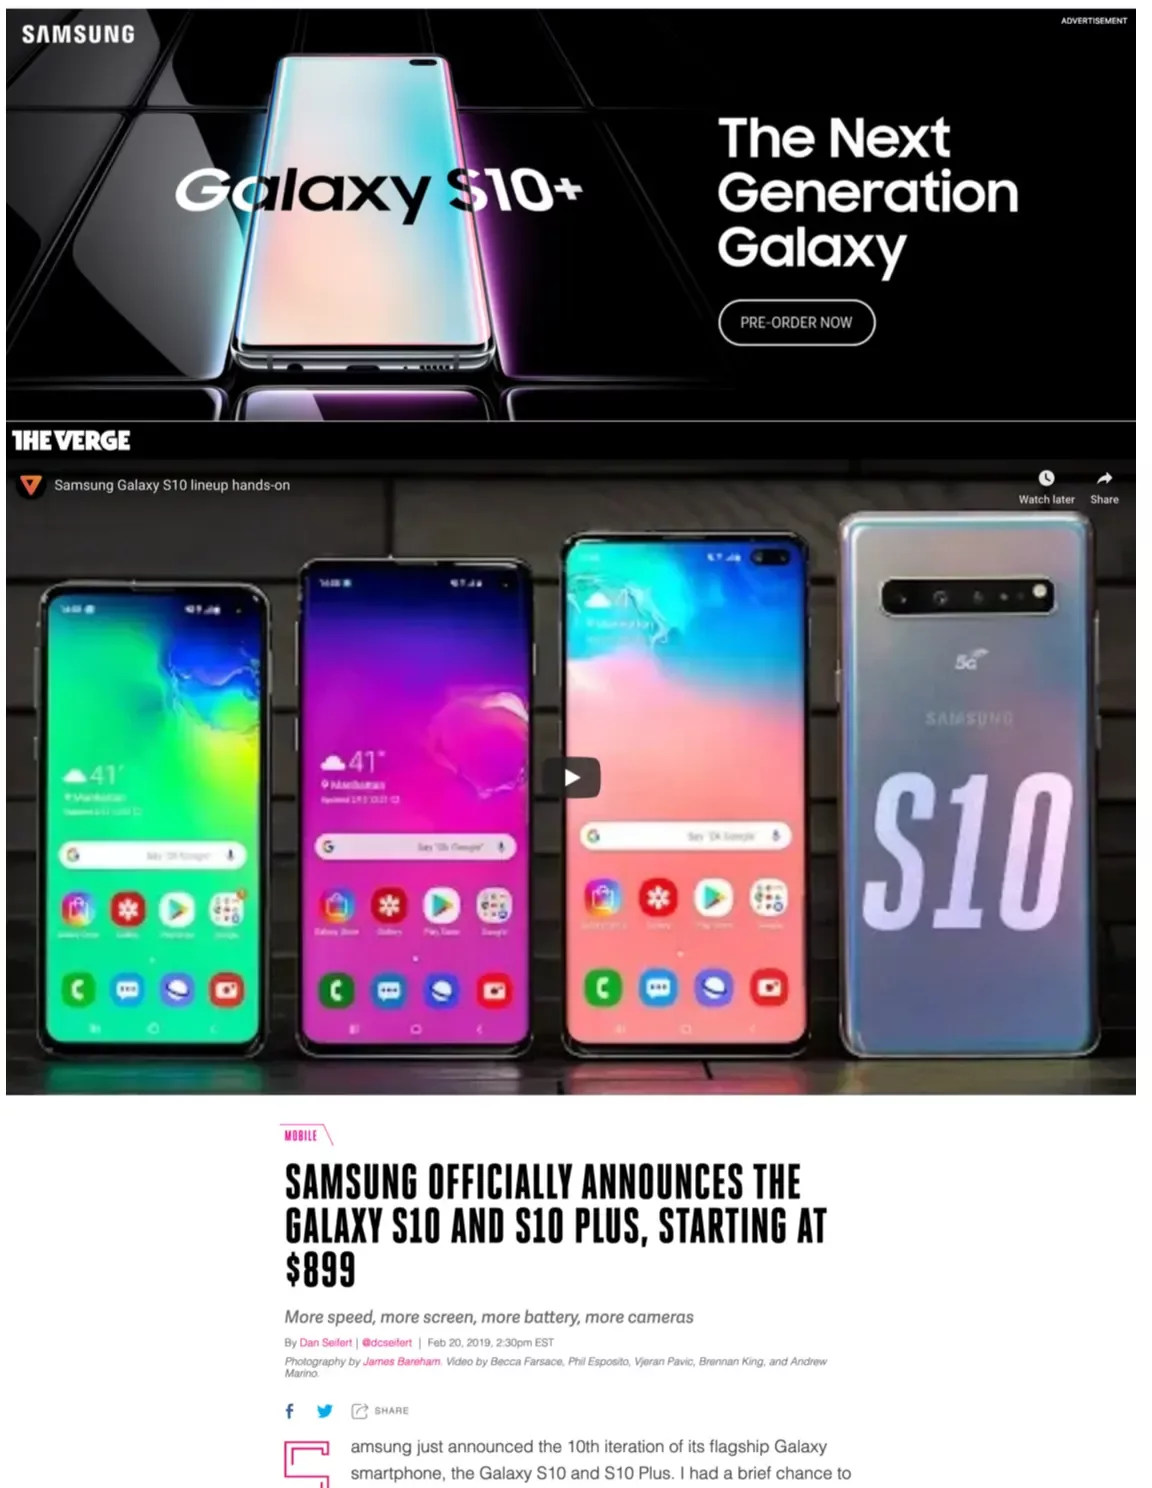 The Samsung Galaxy S10 online advertising as seen on the Verge.